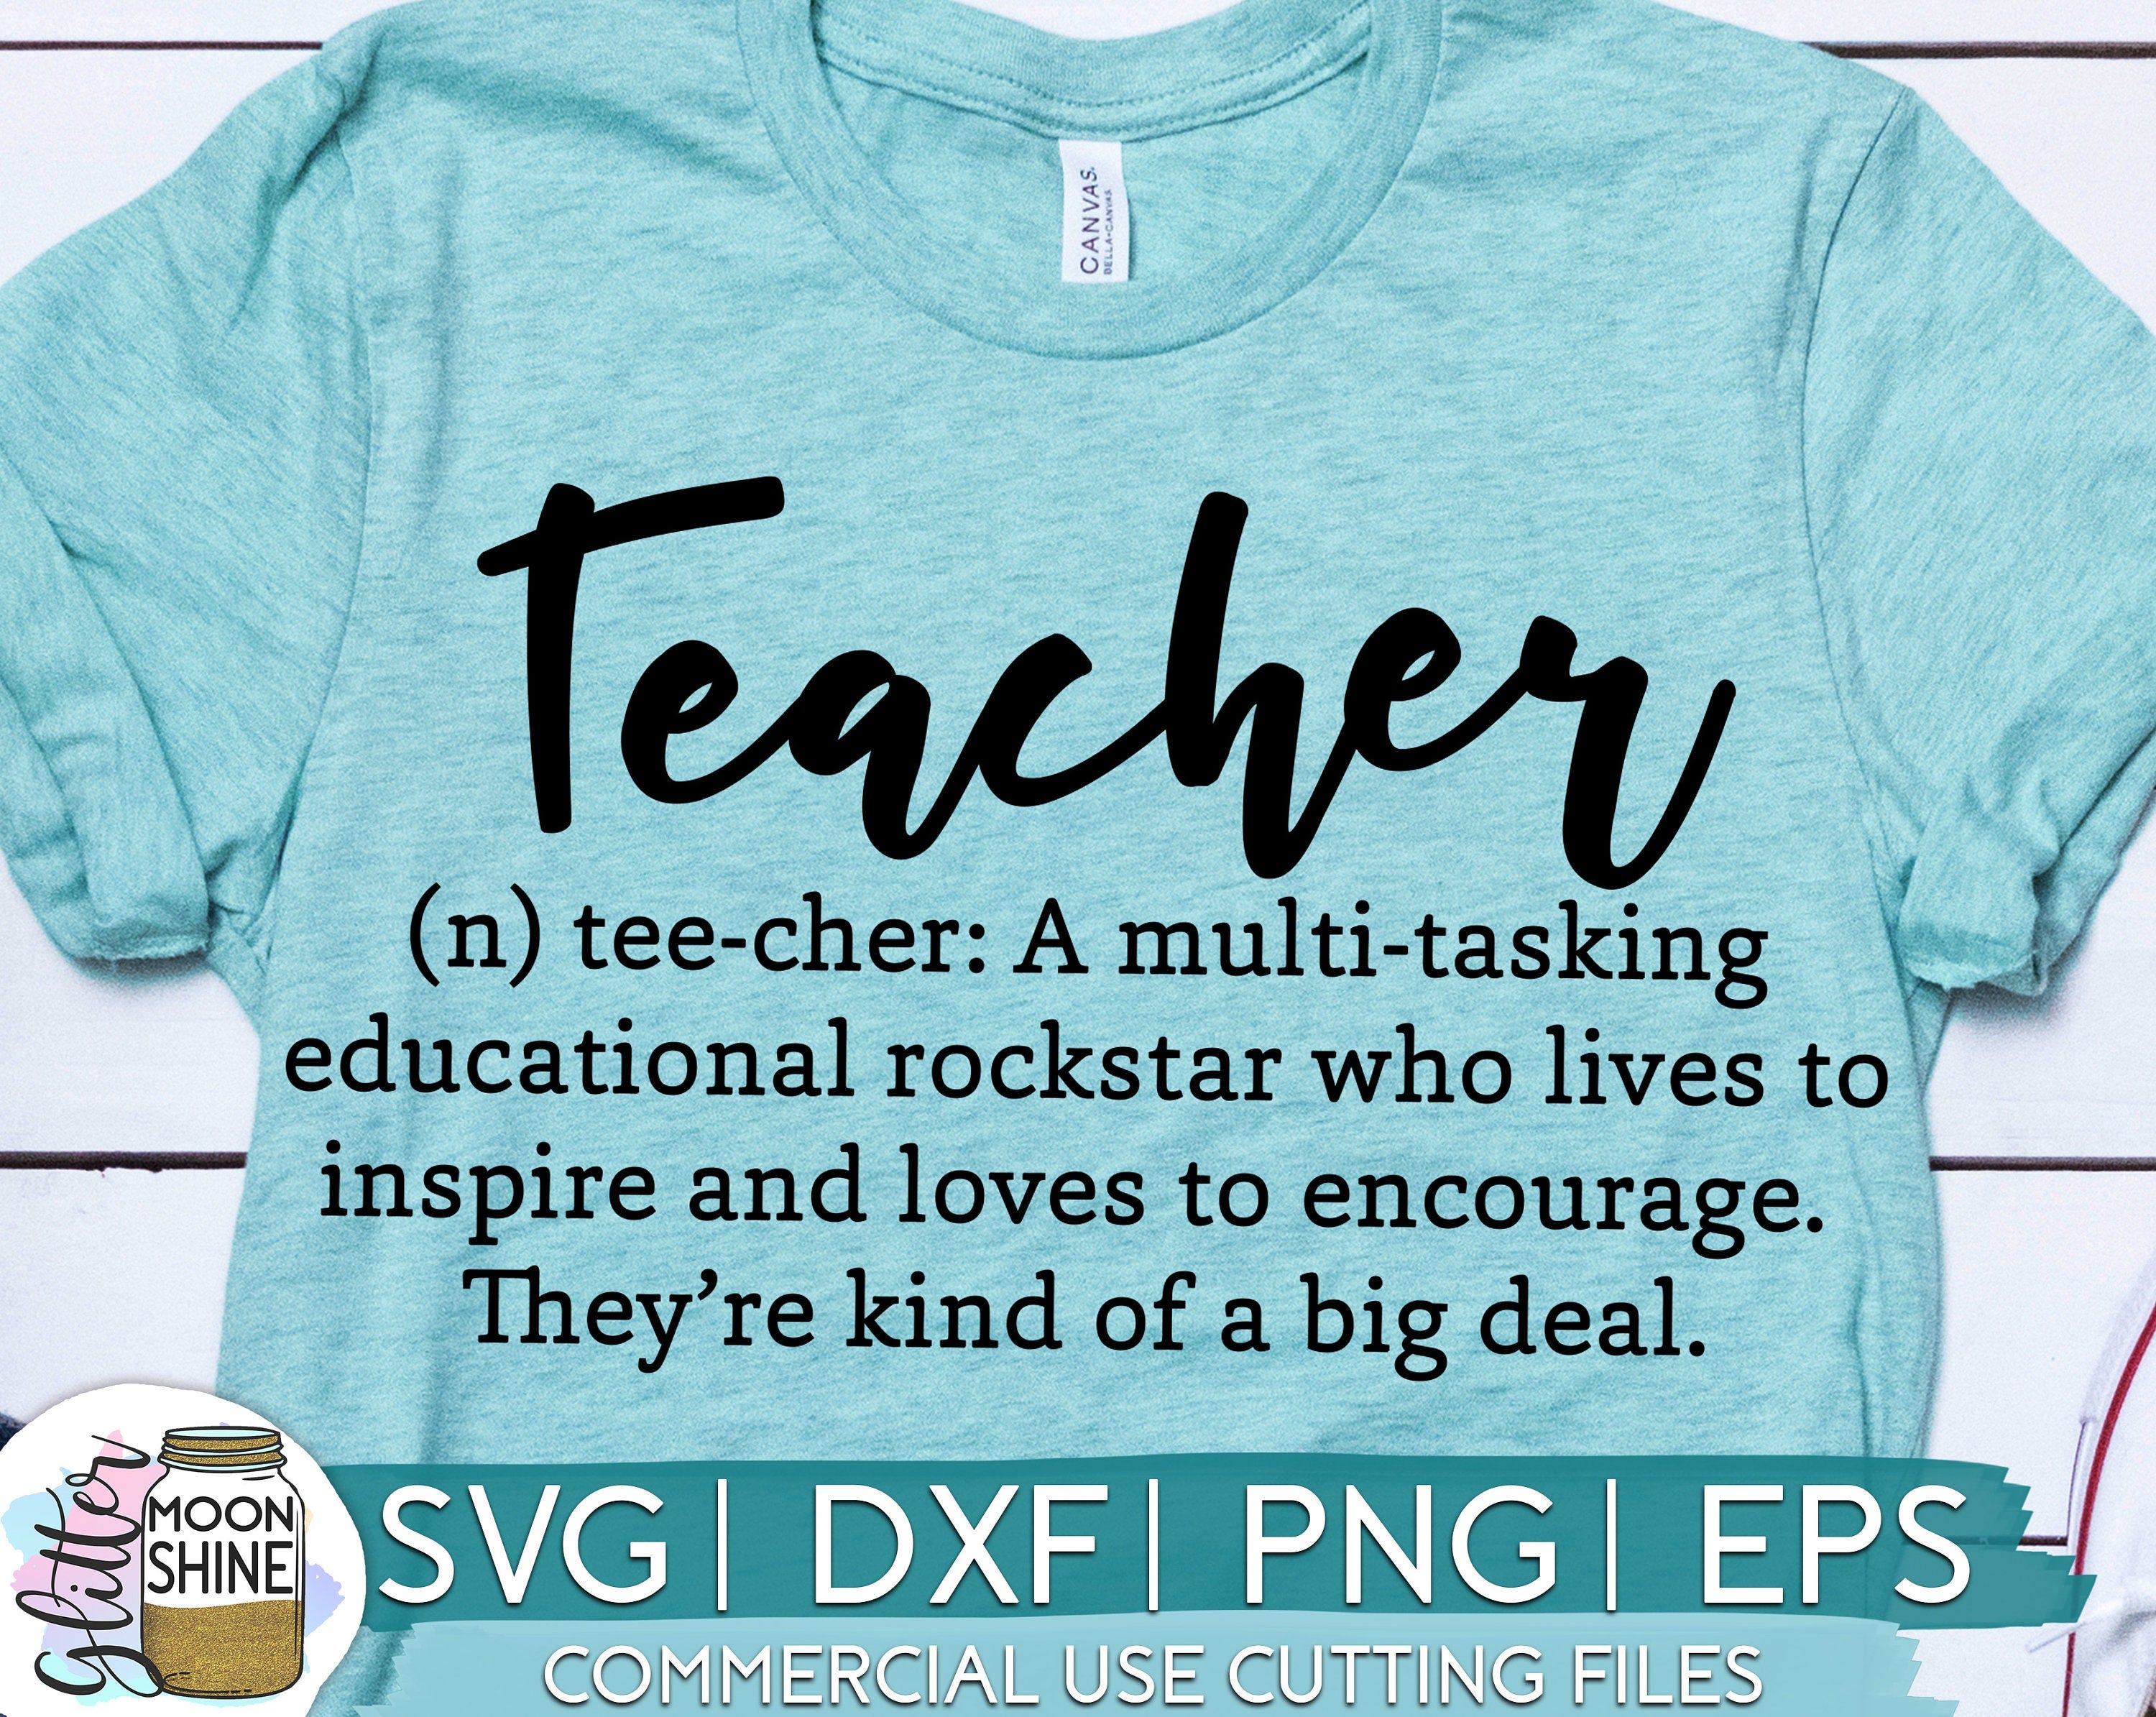 Teacher Definition svg eps dxf png cutting files for silhouette cameo cricut, Teacher svg, Teaching, Back to School, Teacher Quote, Saying